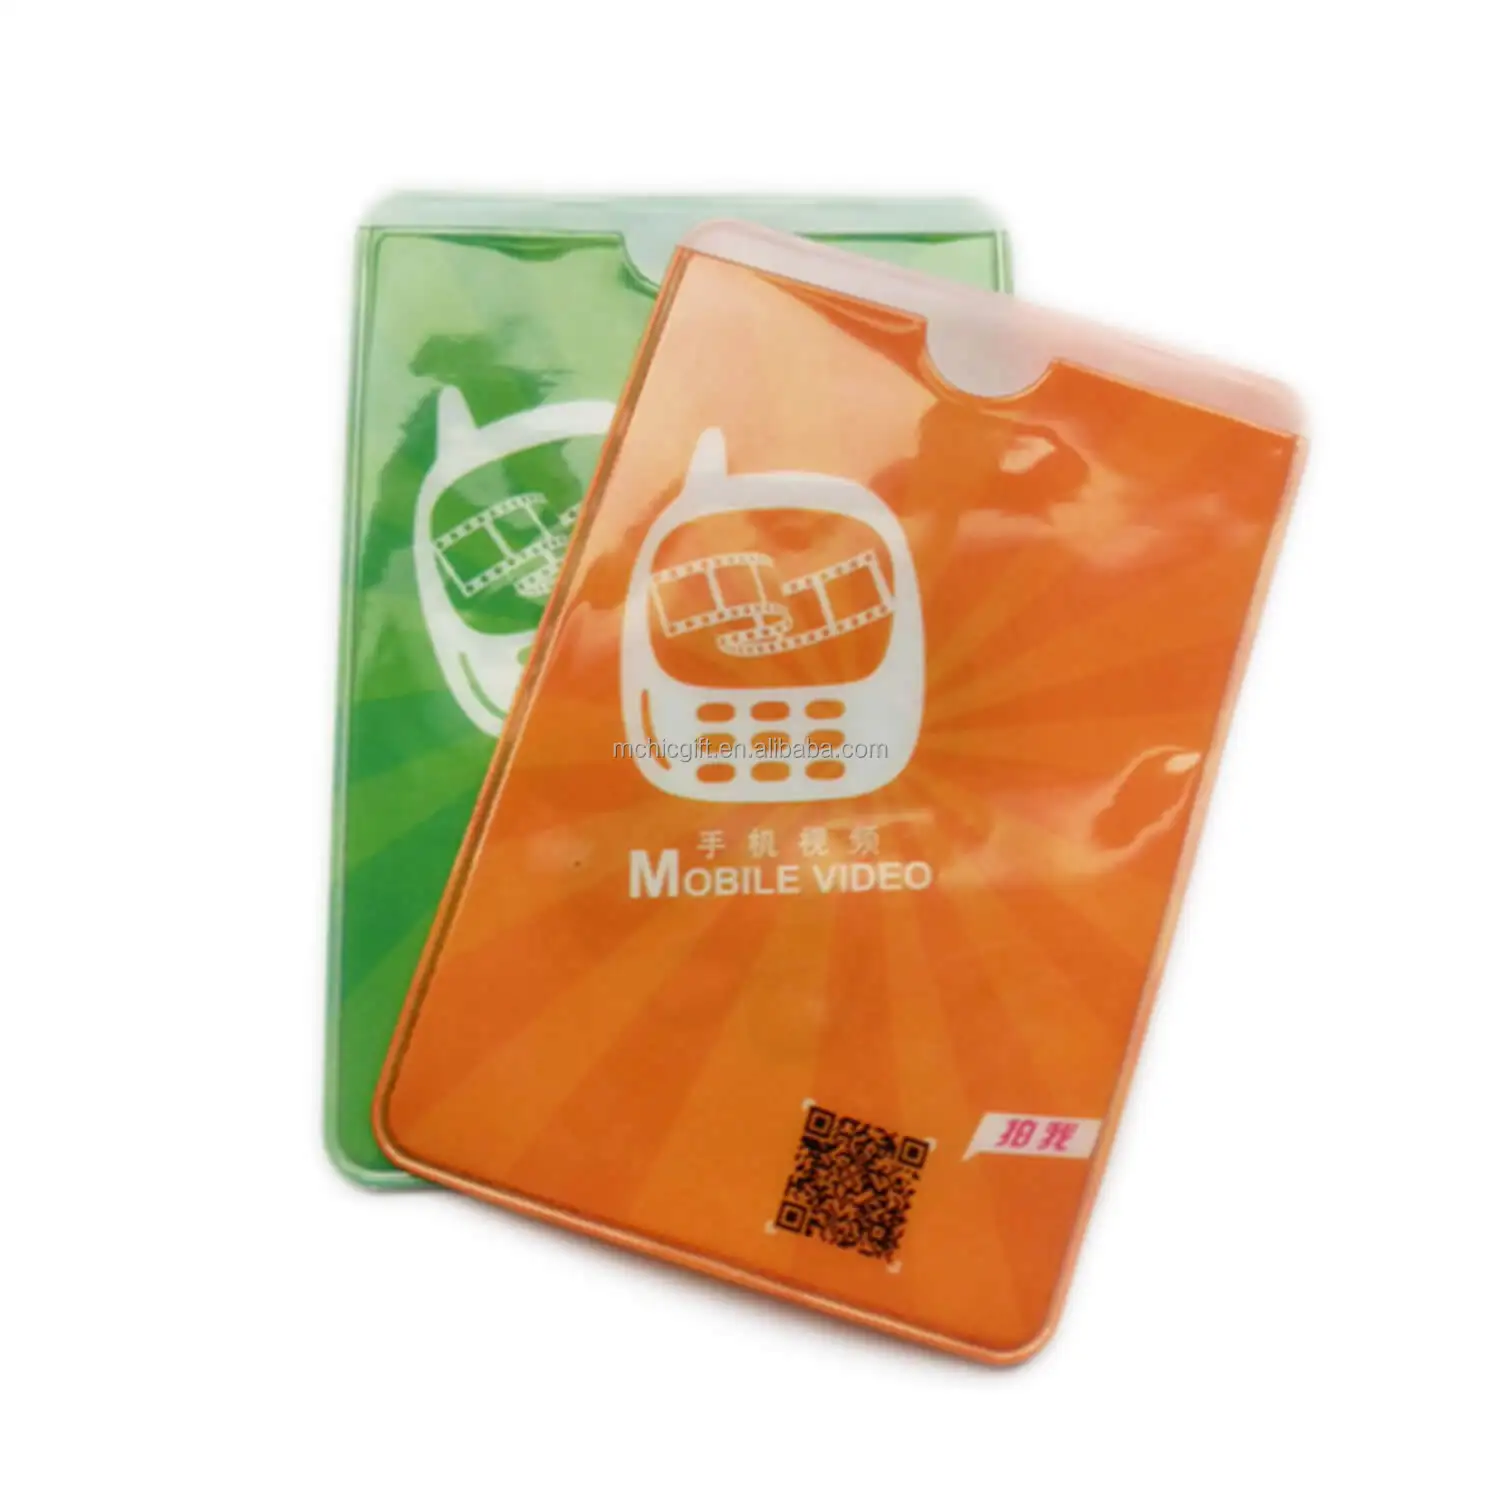 Customized Full Color Print Soft Plastic Atm Pouch,Flexible Pvc Atm Card Holder,Credit Card Sleeve - Buy Atm Card Pouch,Pvc Atm Cover,Atm Card Holder Product on Alibaba.com